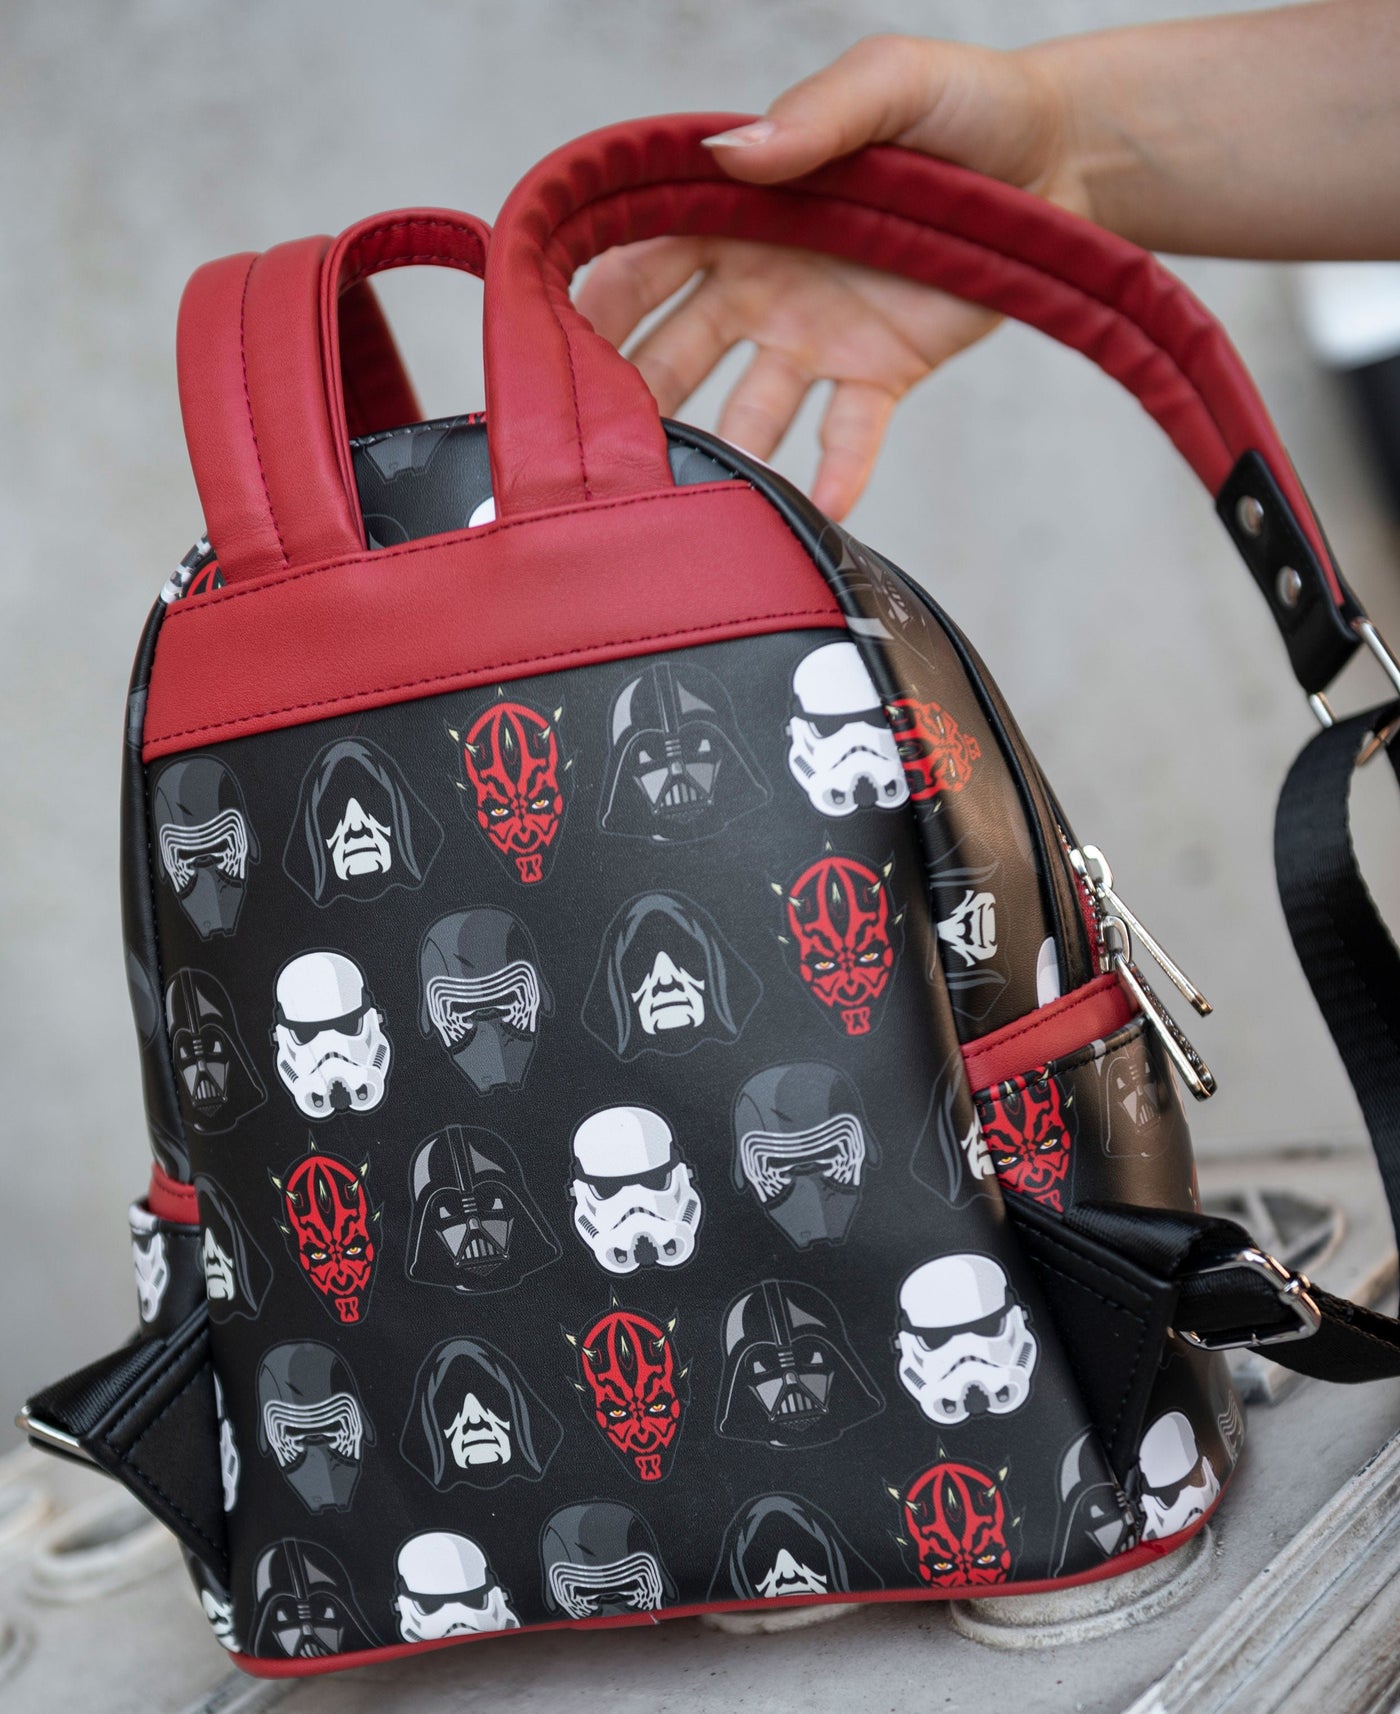 707 Street Exclusive -  Loungefly Star Wars Sith Villains Backpack - IRL Back